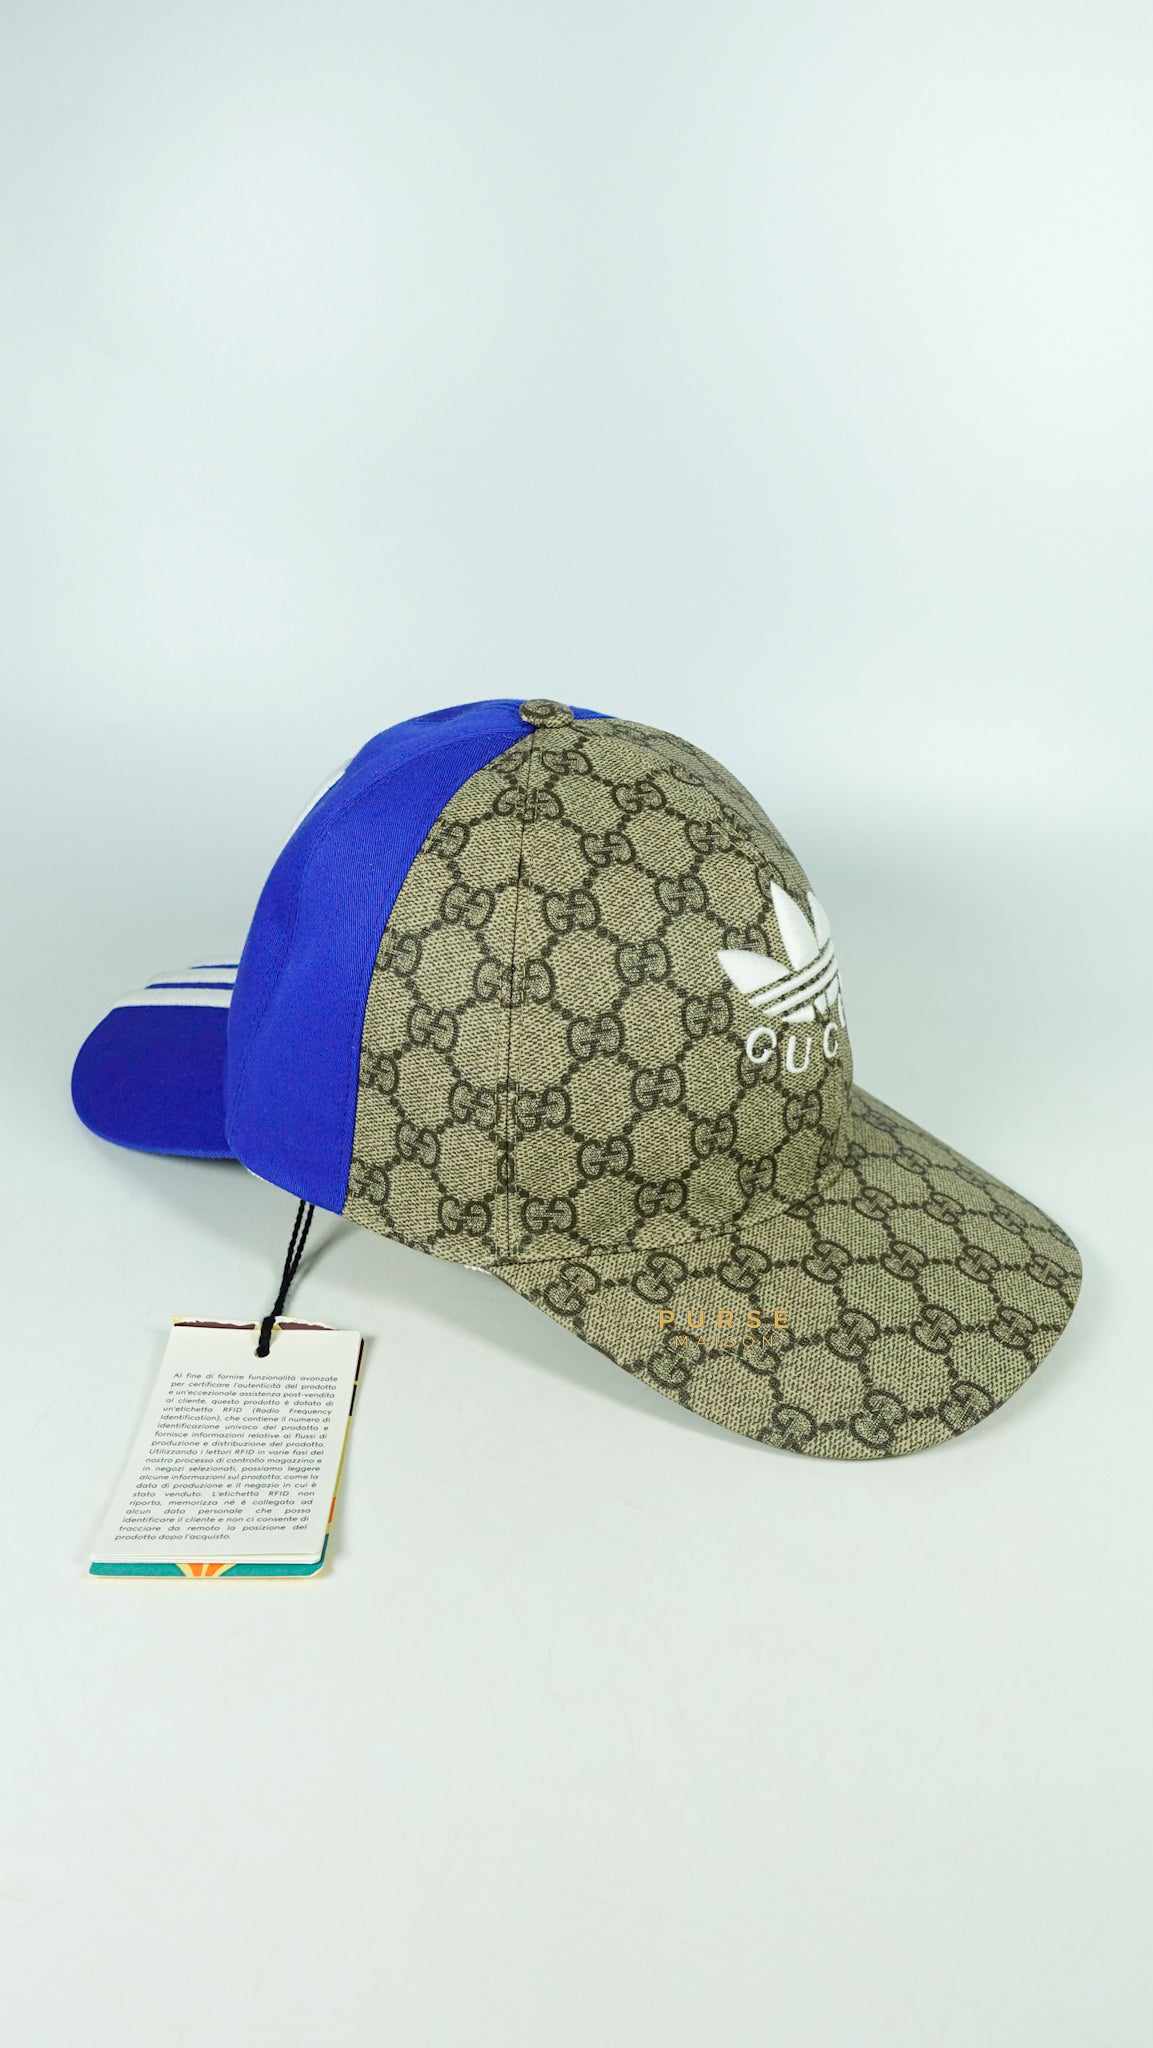 Gucci x Adidas Baseball Hat with Two Peaks Mocked (59cm)